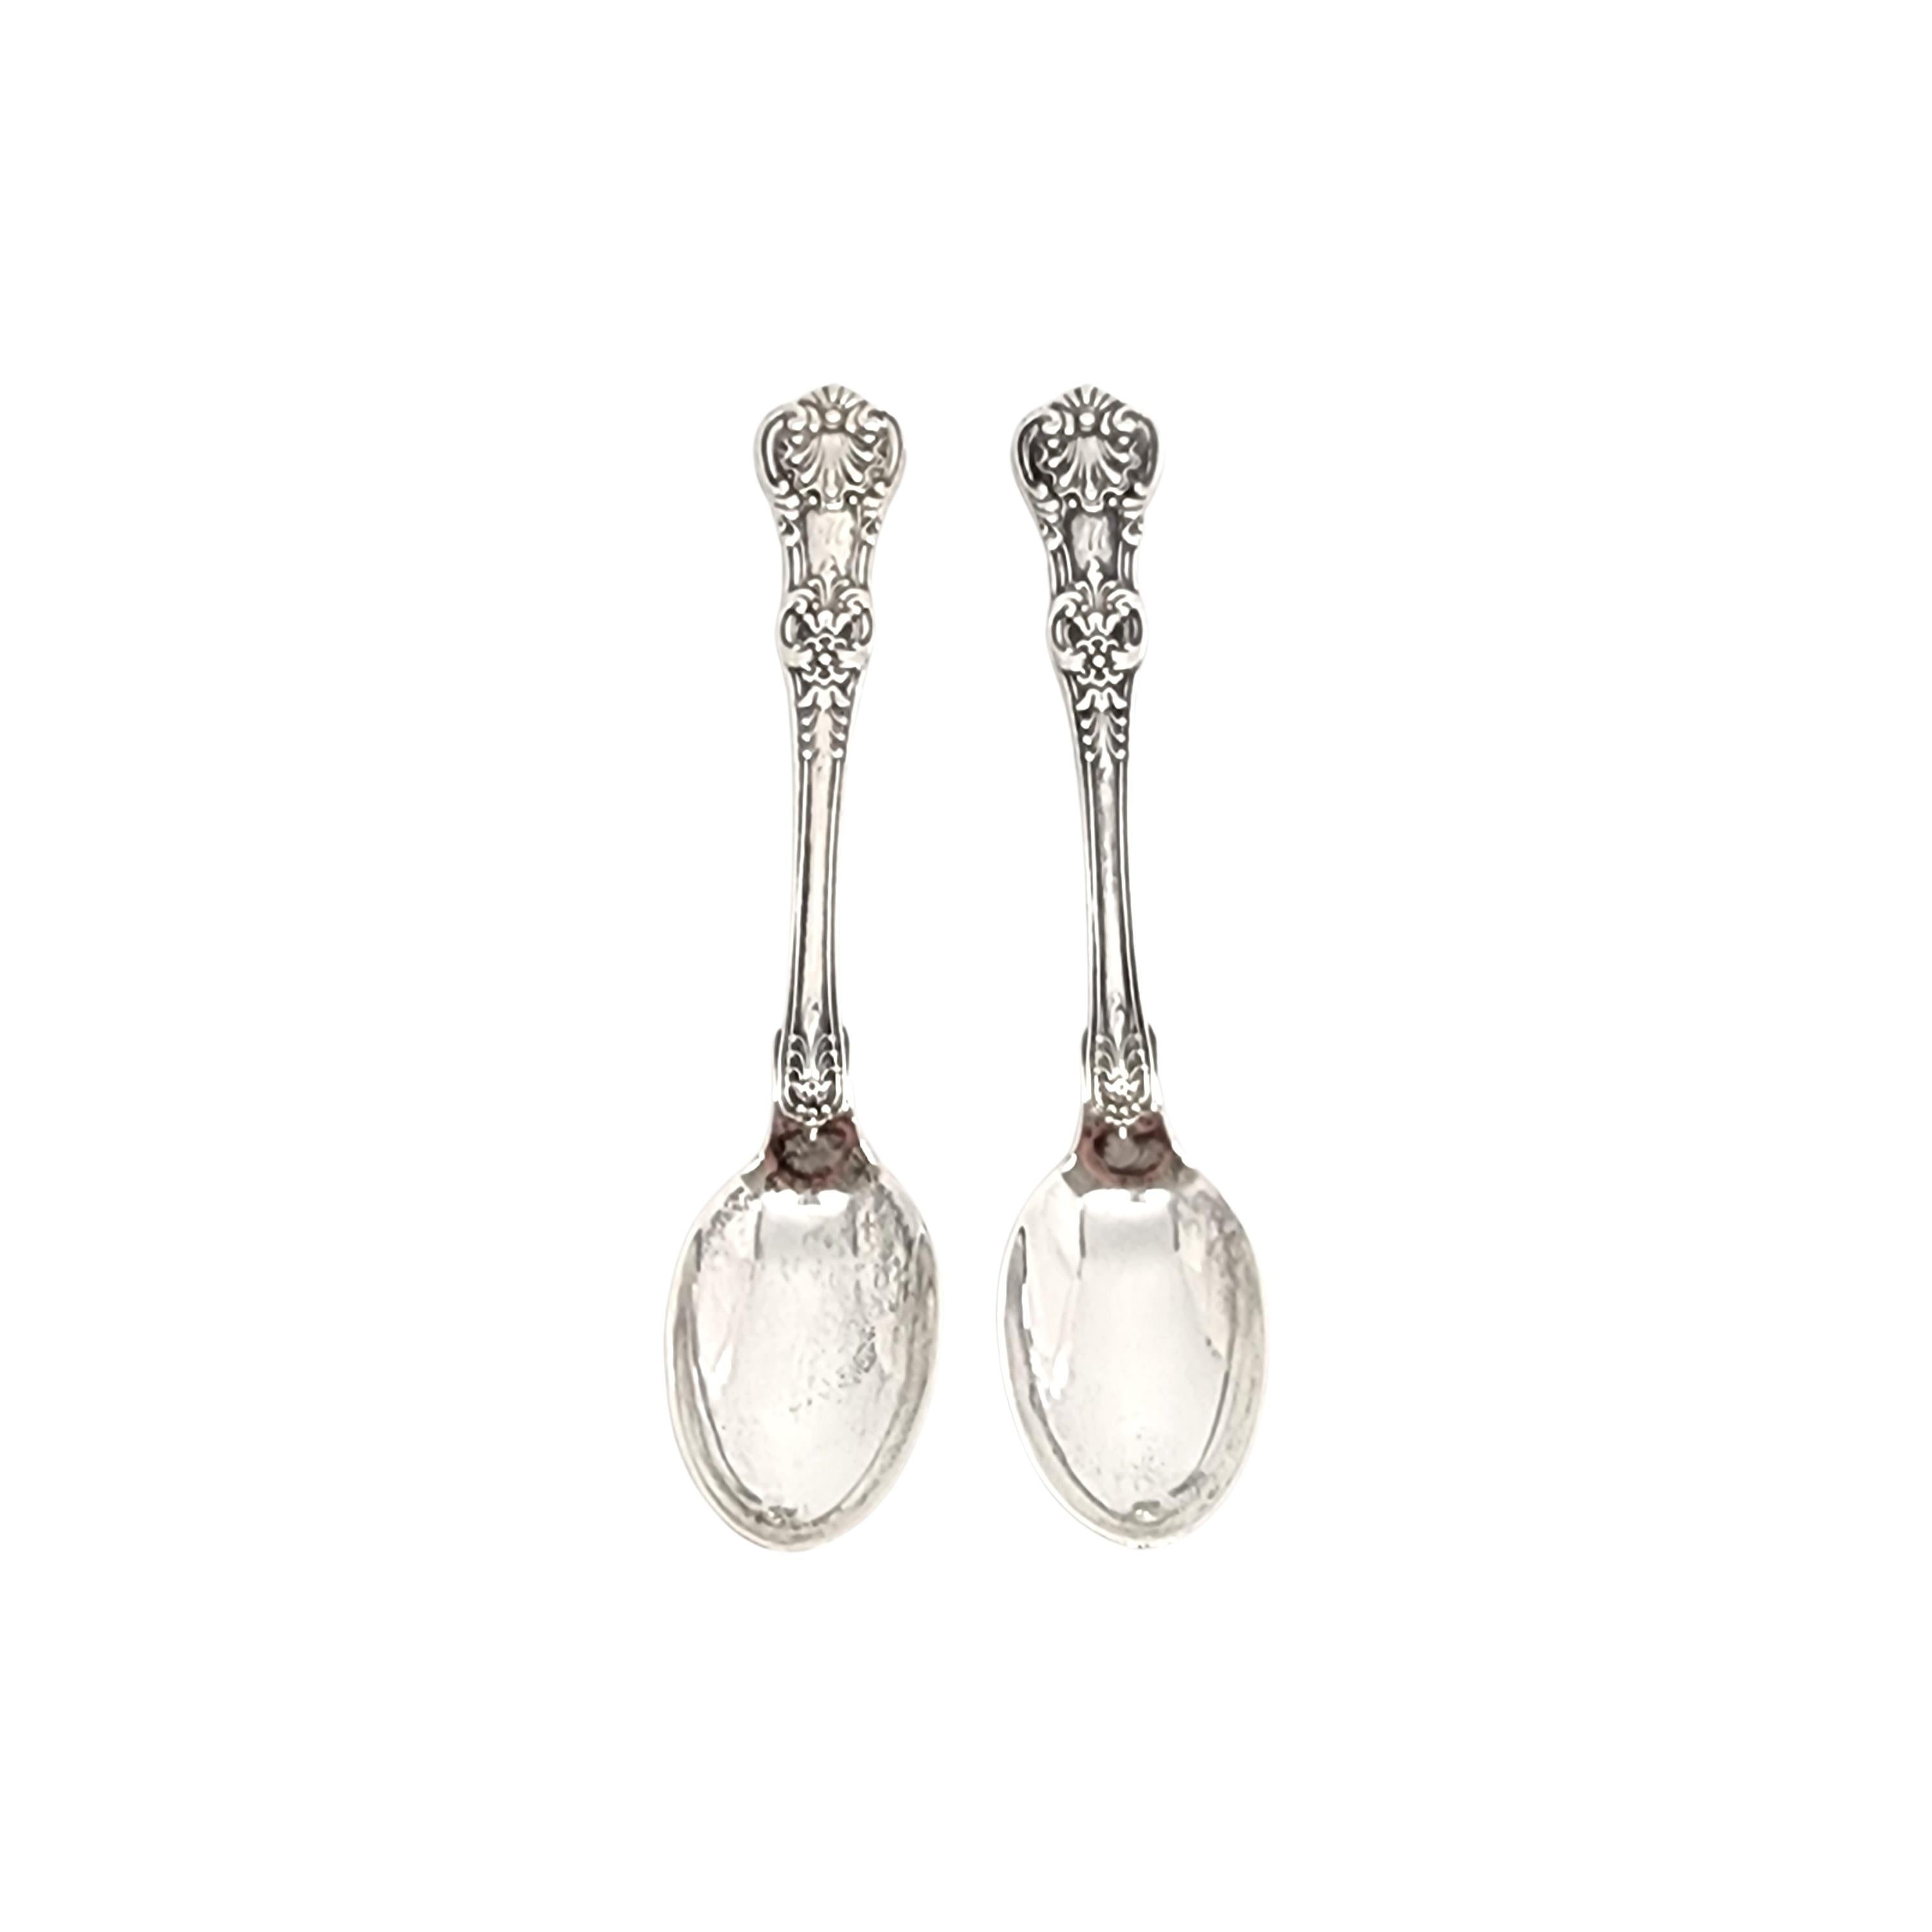 Set of 2 Tiffany & Co Sterling Silver English King Demitasse Spoons 2